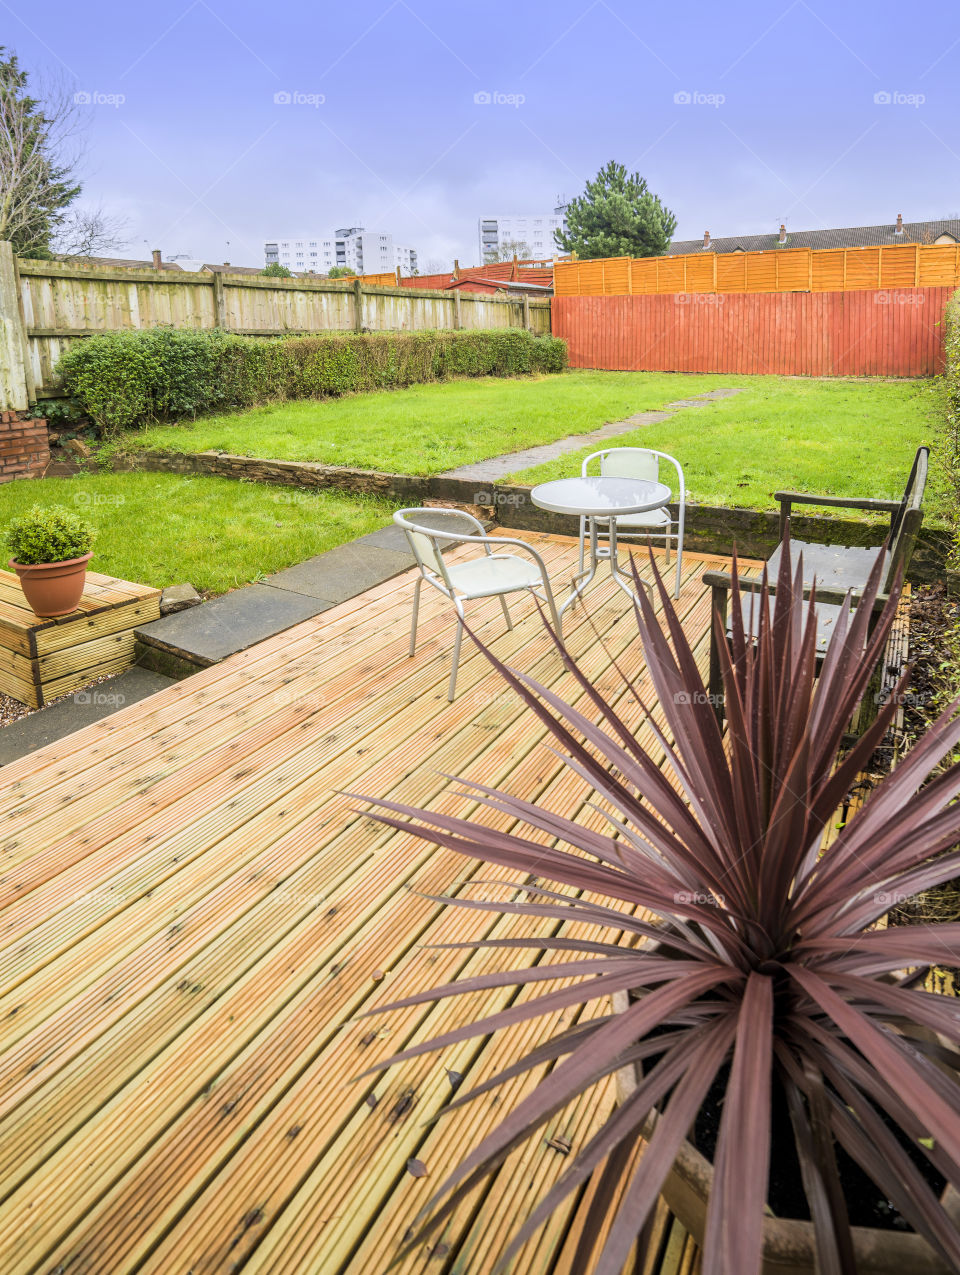 Patio and garden of newly decorated and refurbished house. This image has a property release.